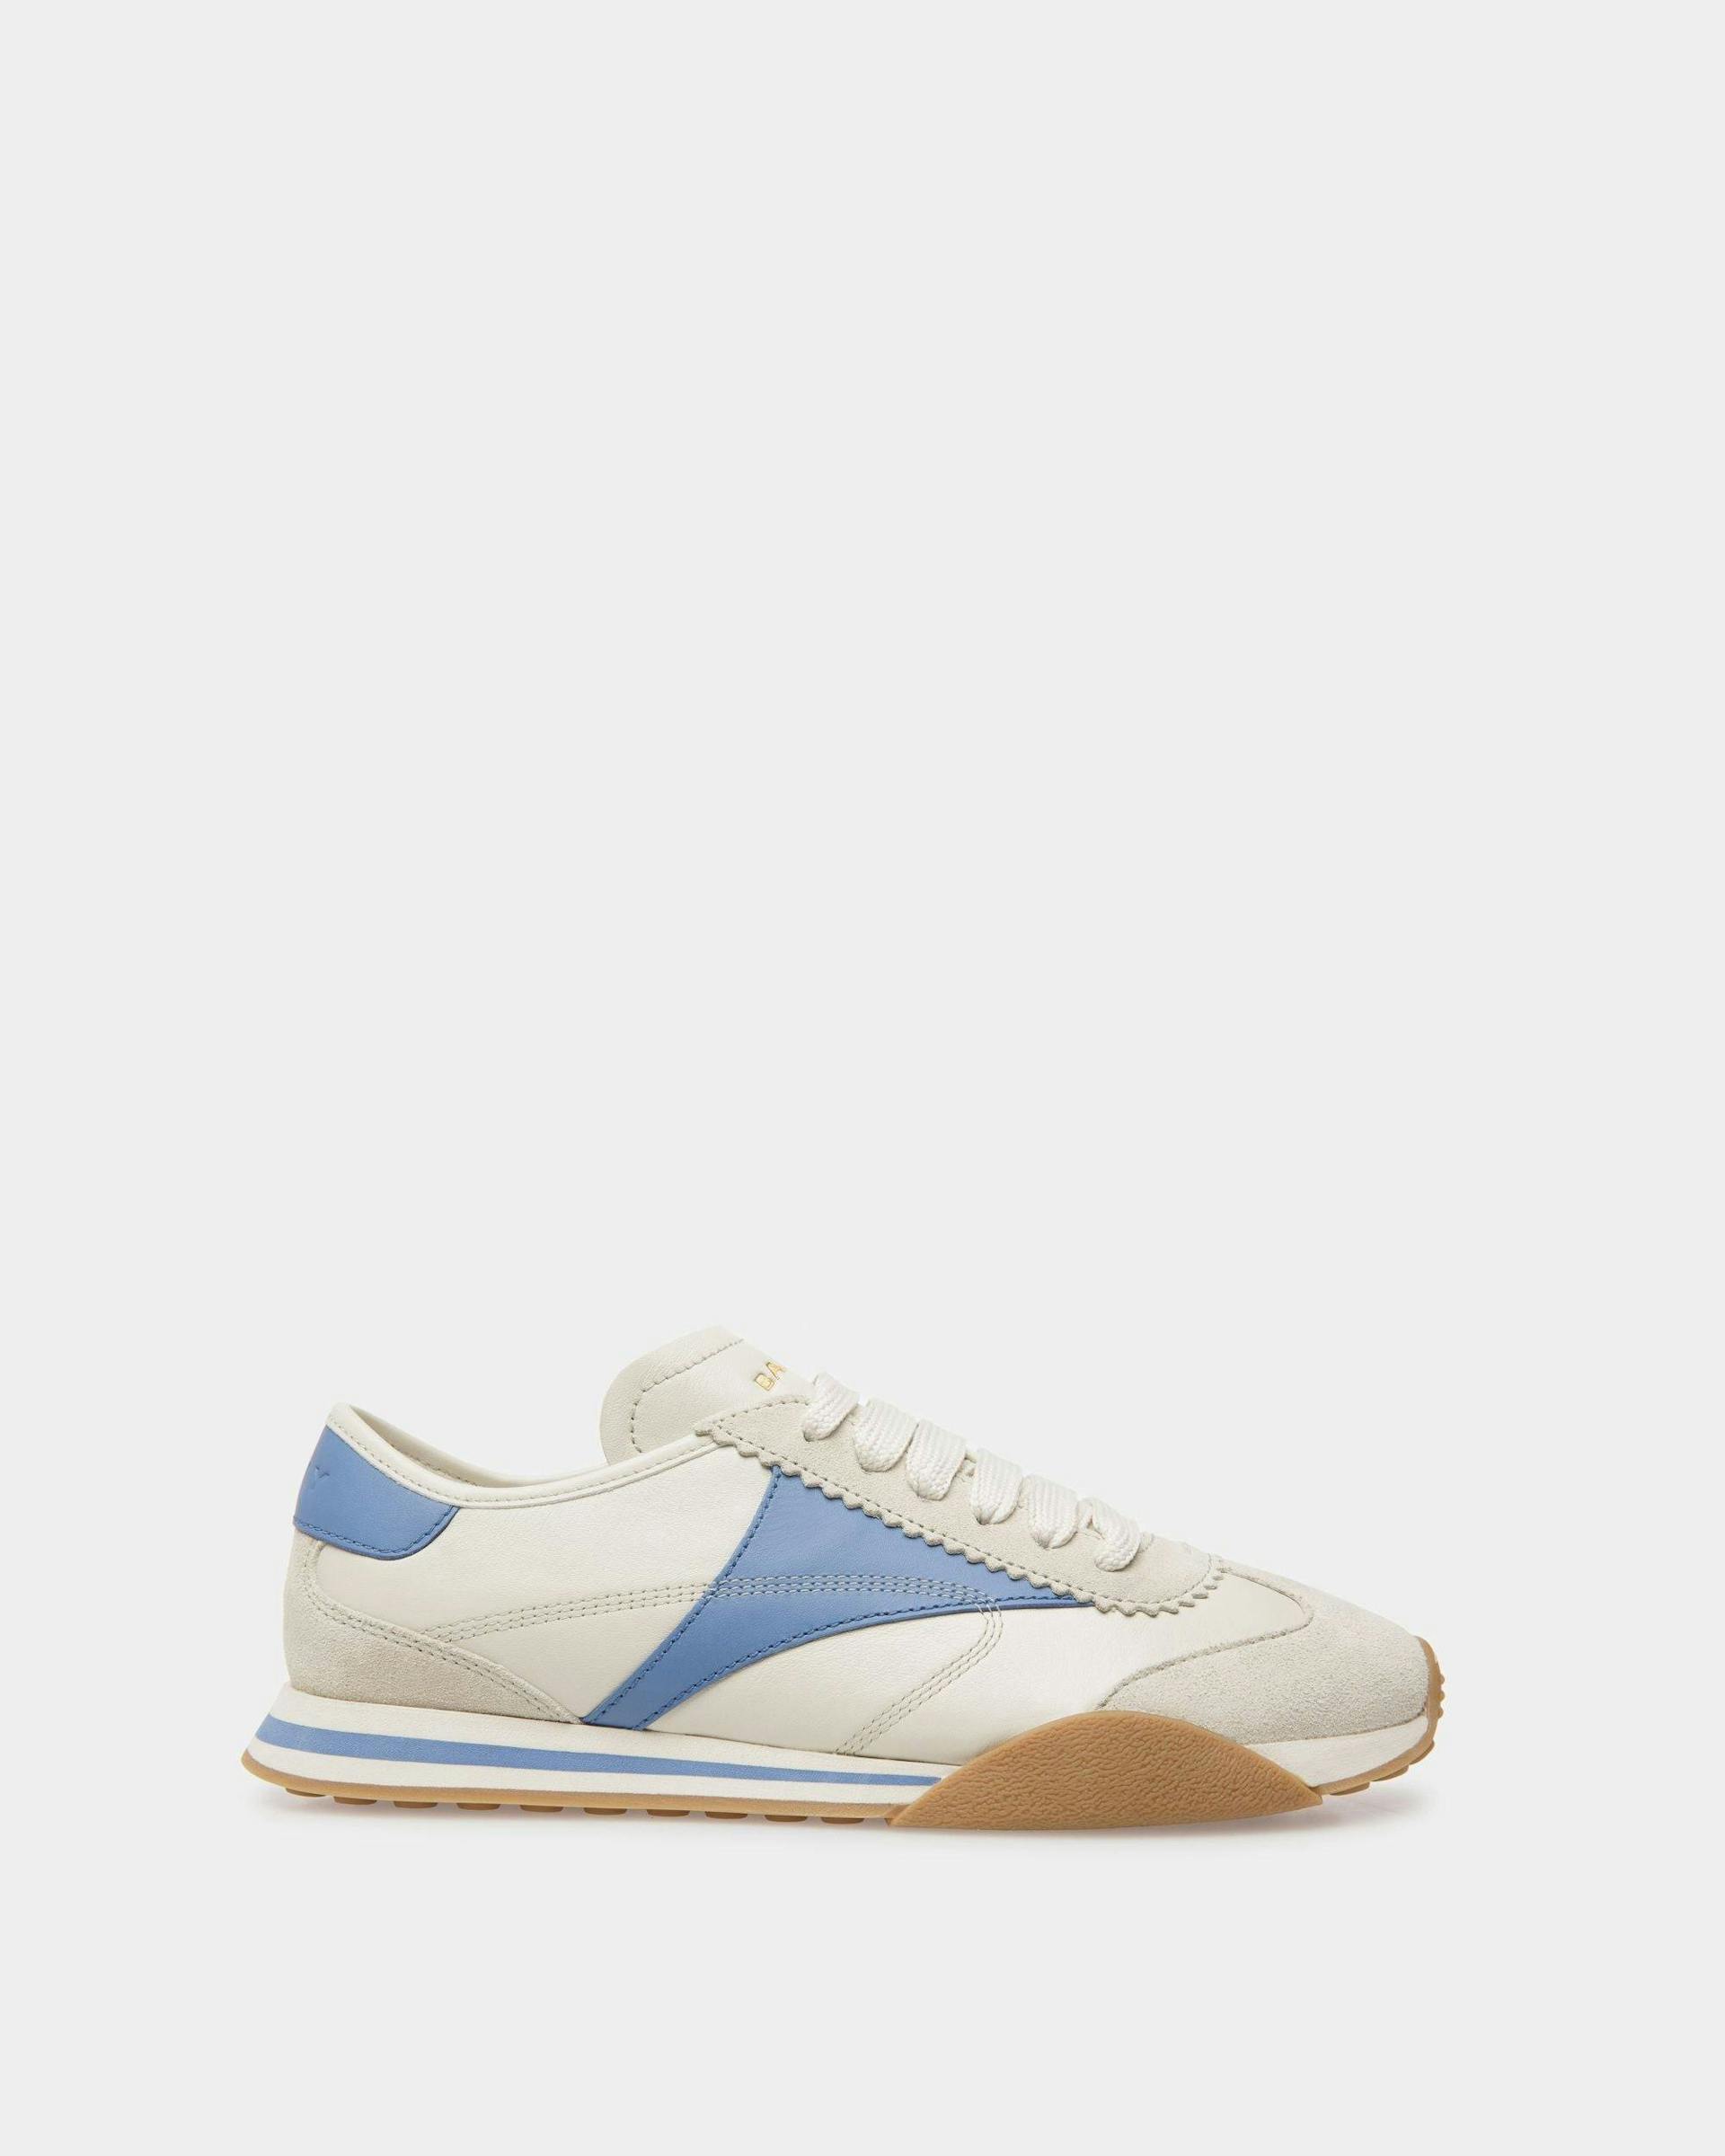 Sussex Sneakers In Dusty White And Blue Leather - Women's - Bally - 01